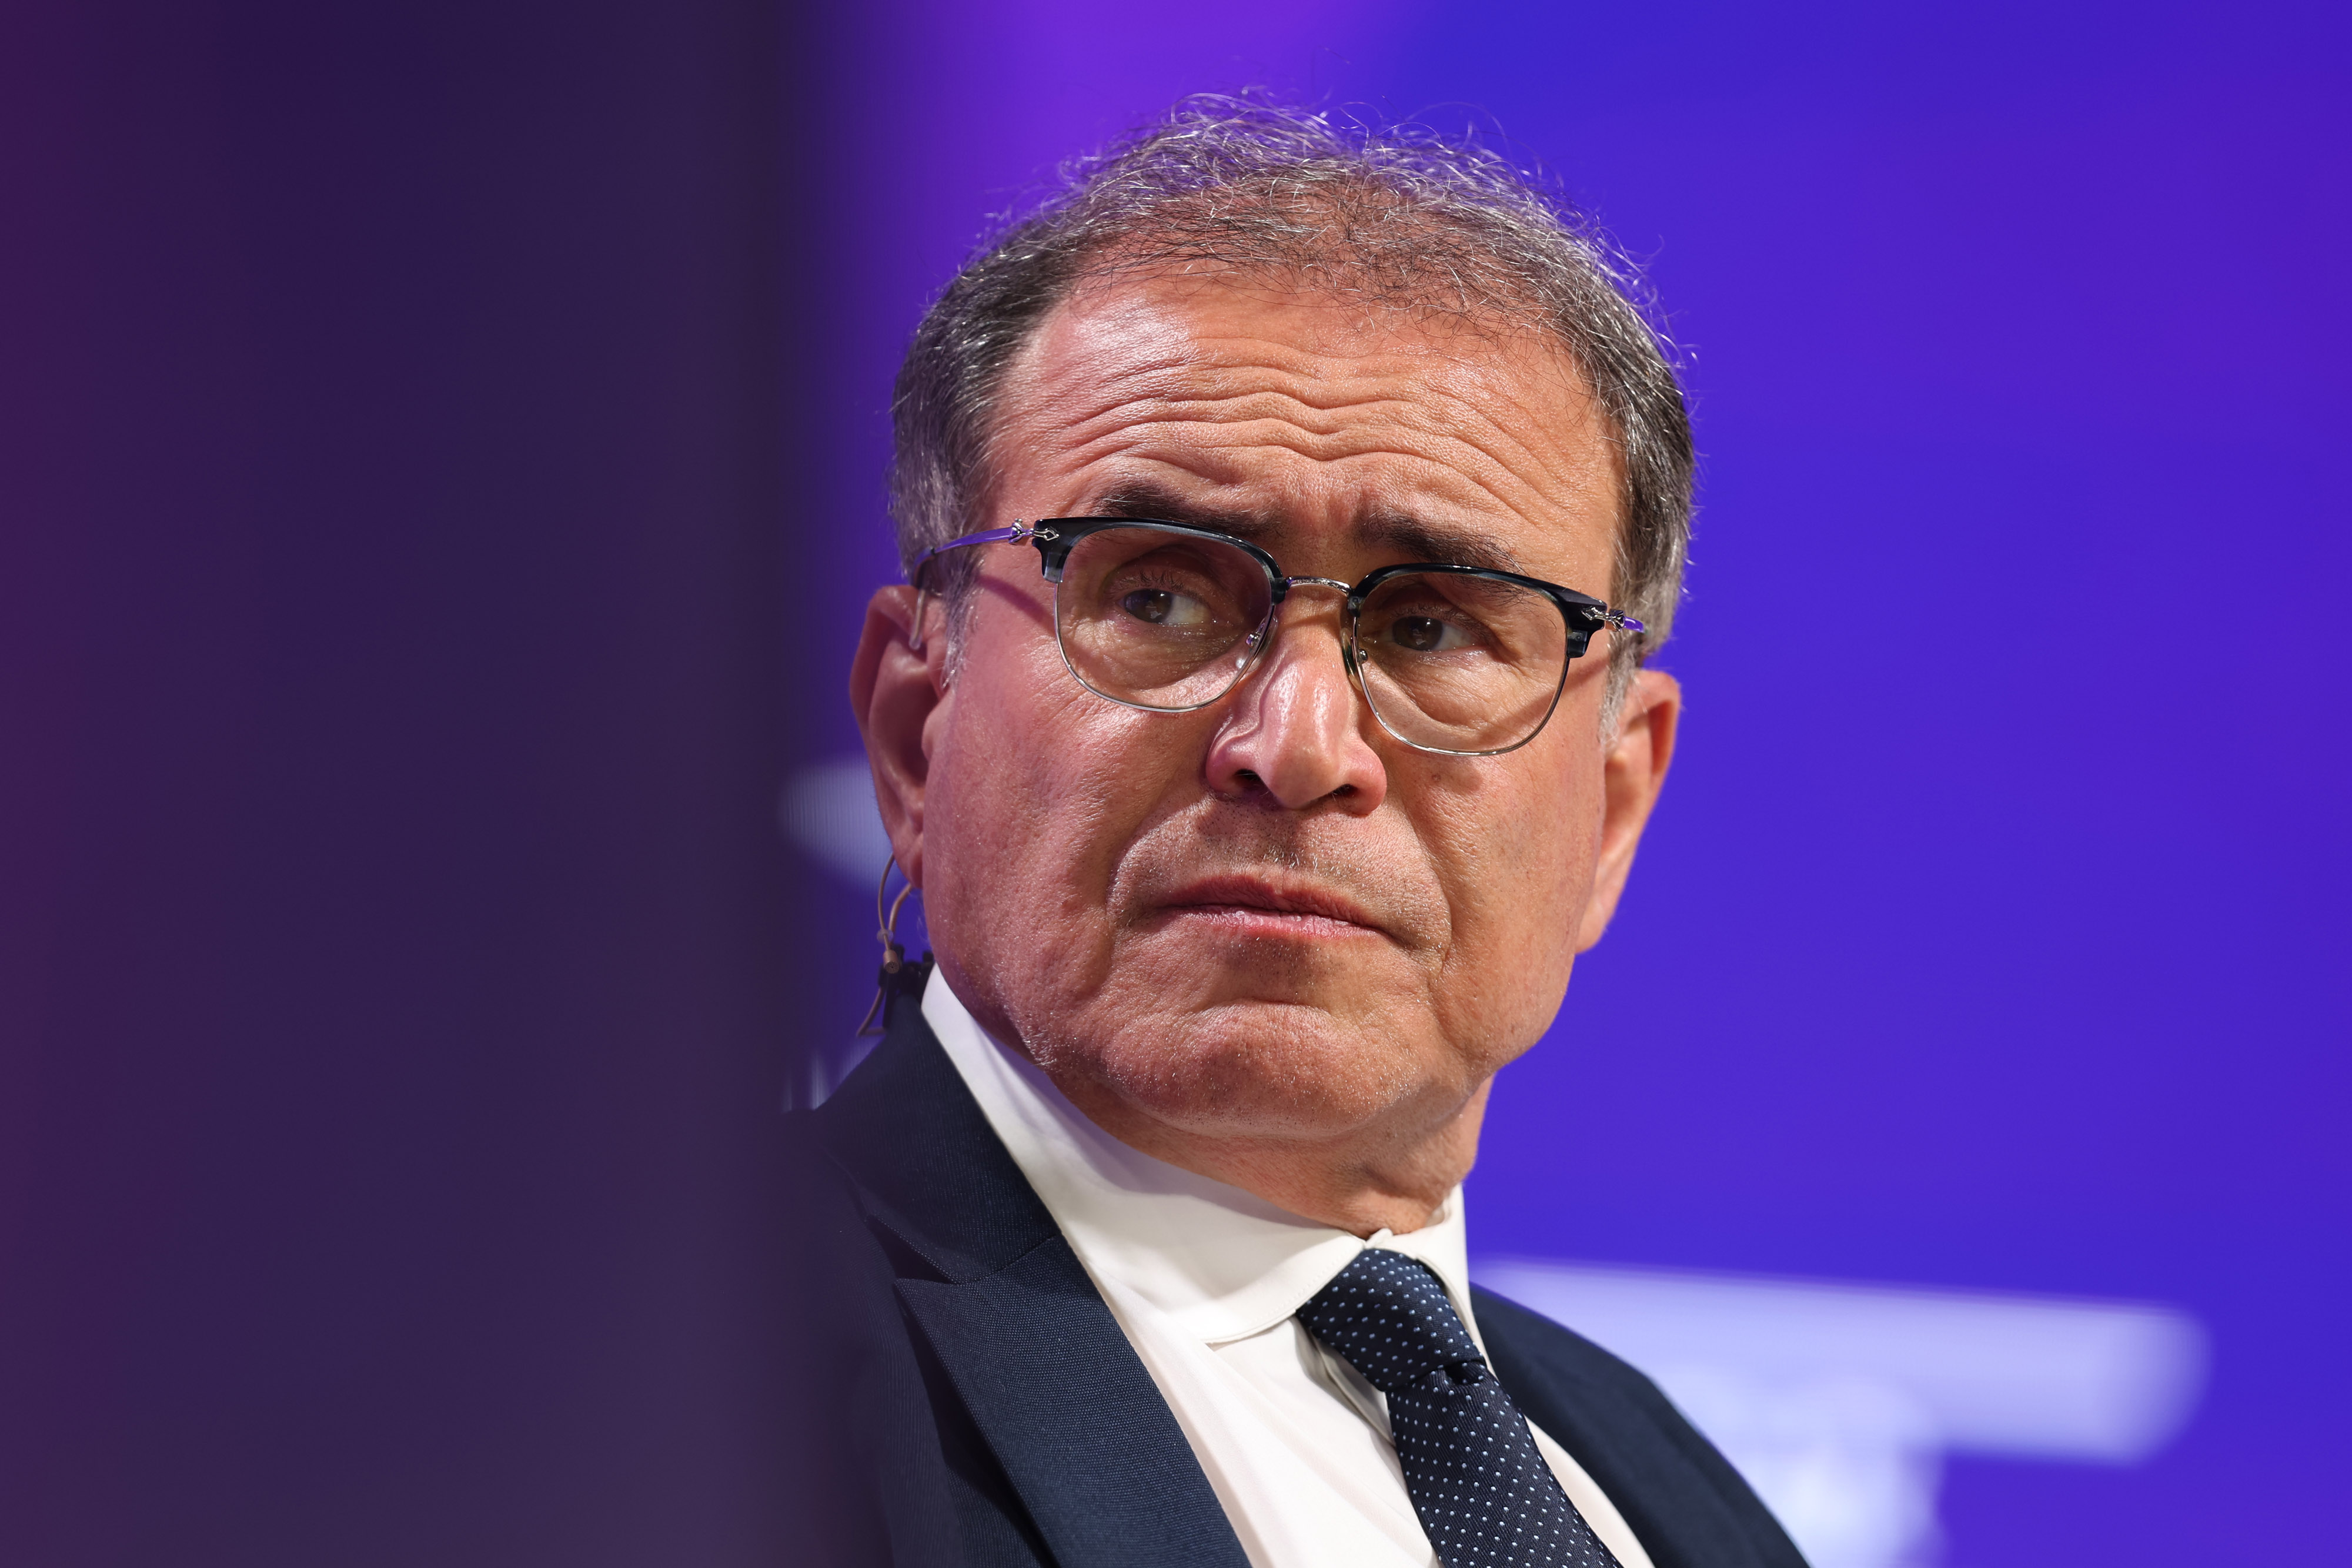 Nouriel Roubini, chief executive officer of Roubini Macro Associates Inc., during a panel session at the Qatar Economic Forum (QEF) in Doha, Qatar, on Tuesday, June 21, 2022. The second annual Qatar Economic Forum convenes global business leaders and heads of state to tackle some of the world's most pressing challenges, through the lens of the Middle East.